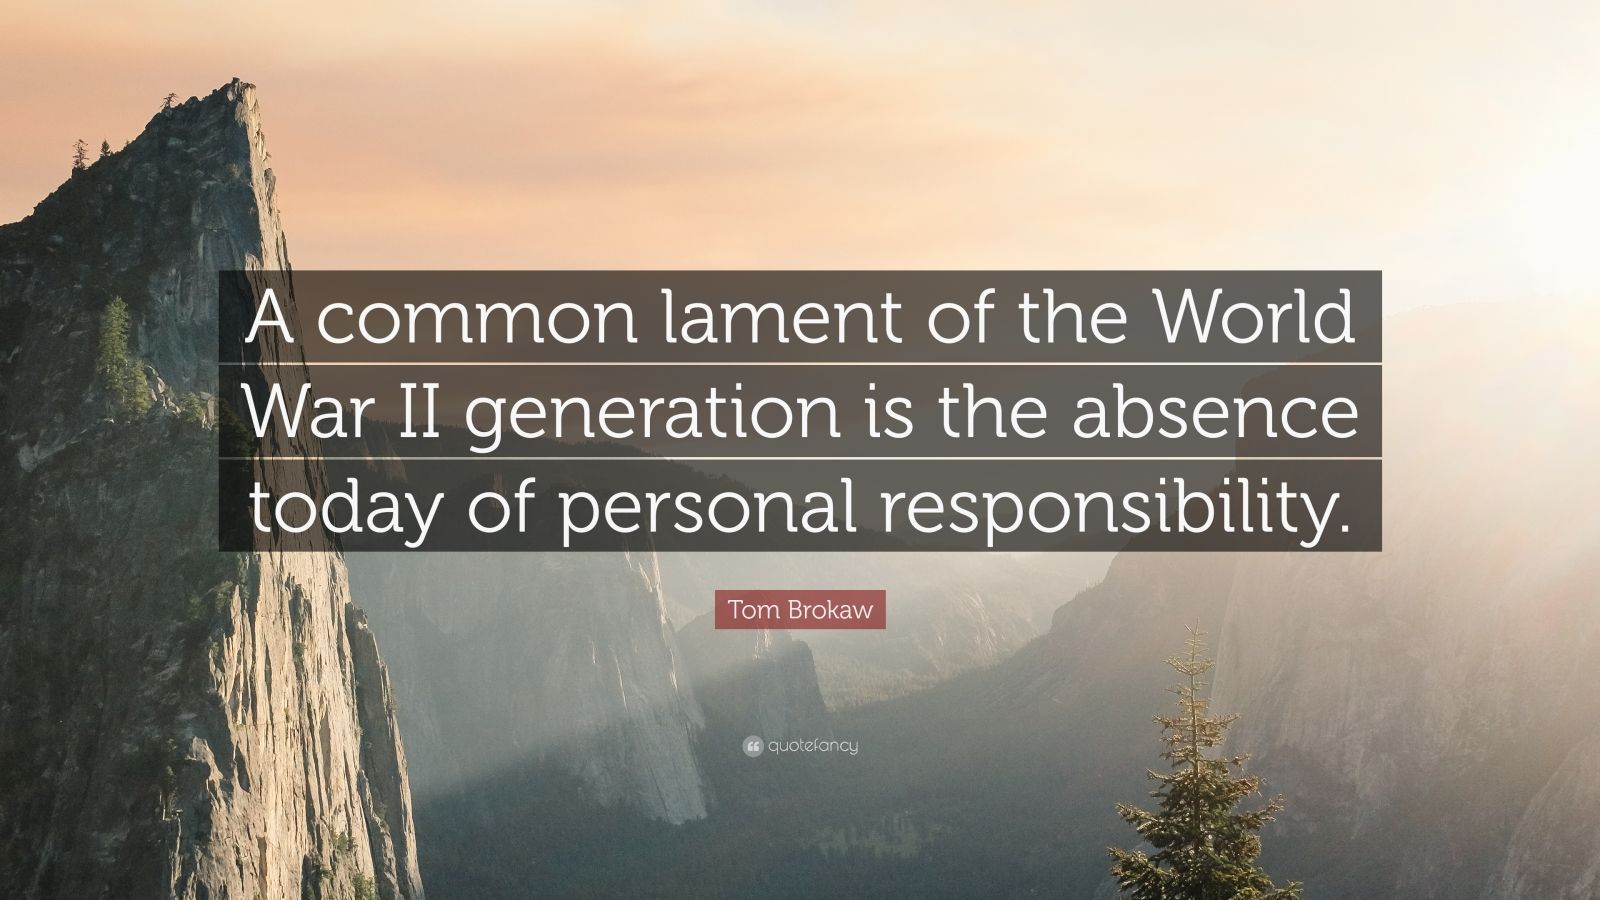 Tom Brokaw Quote: "A common lament of the World War II generation is the absence today of ...